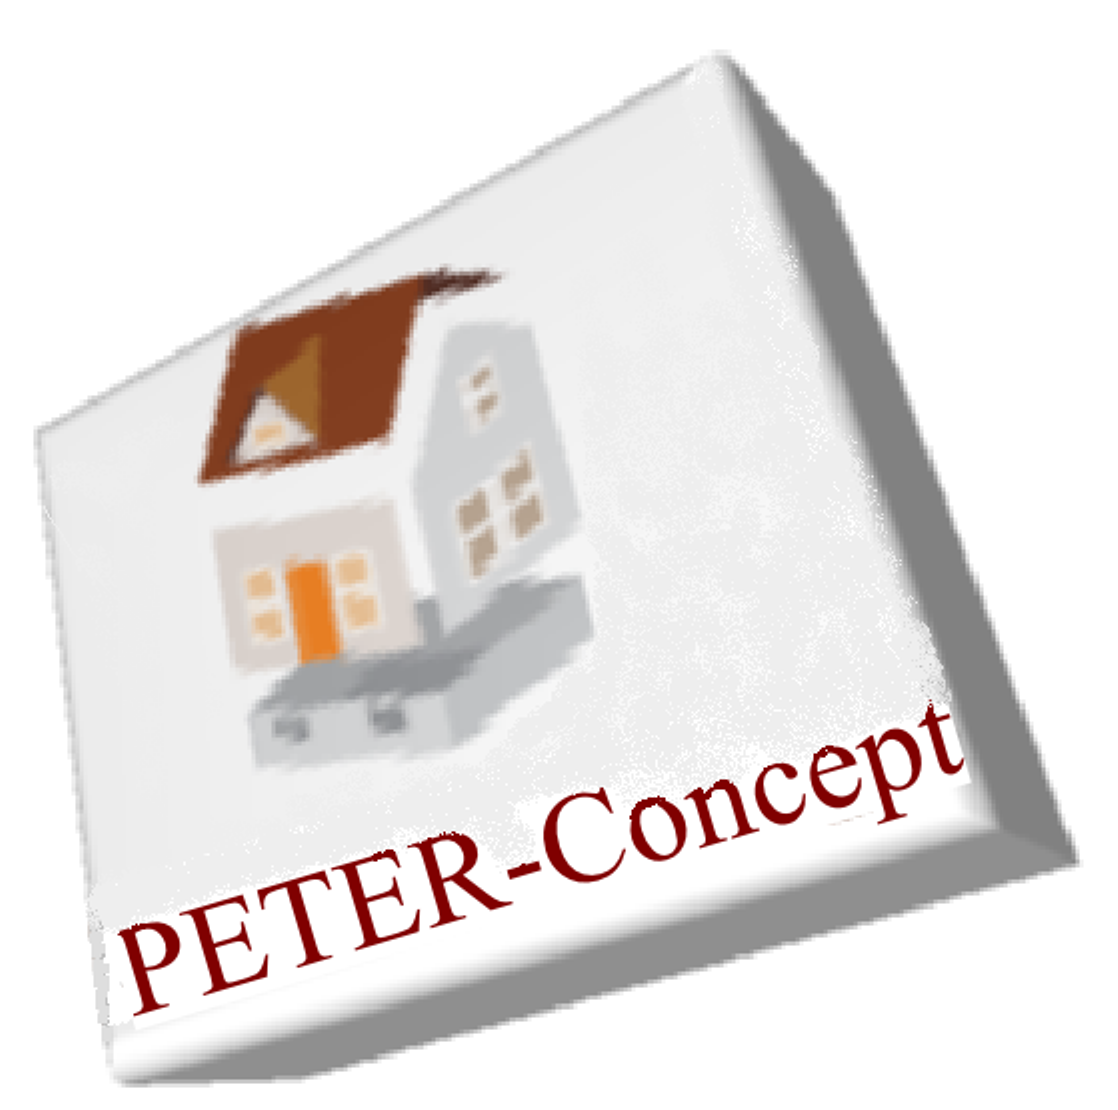 PETER-Concept